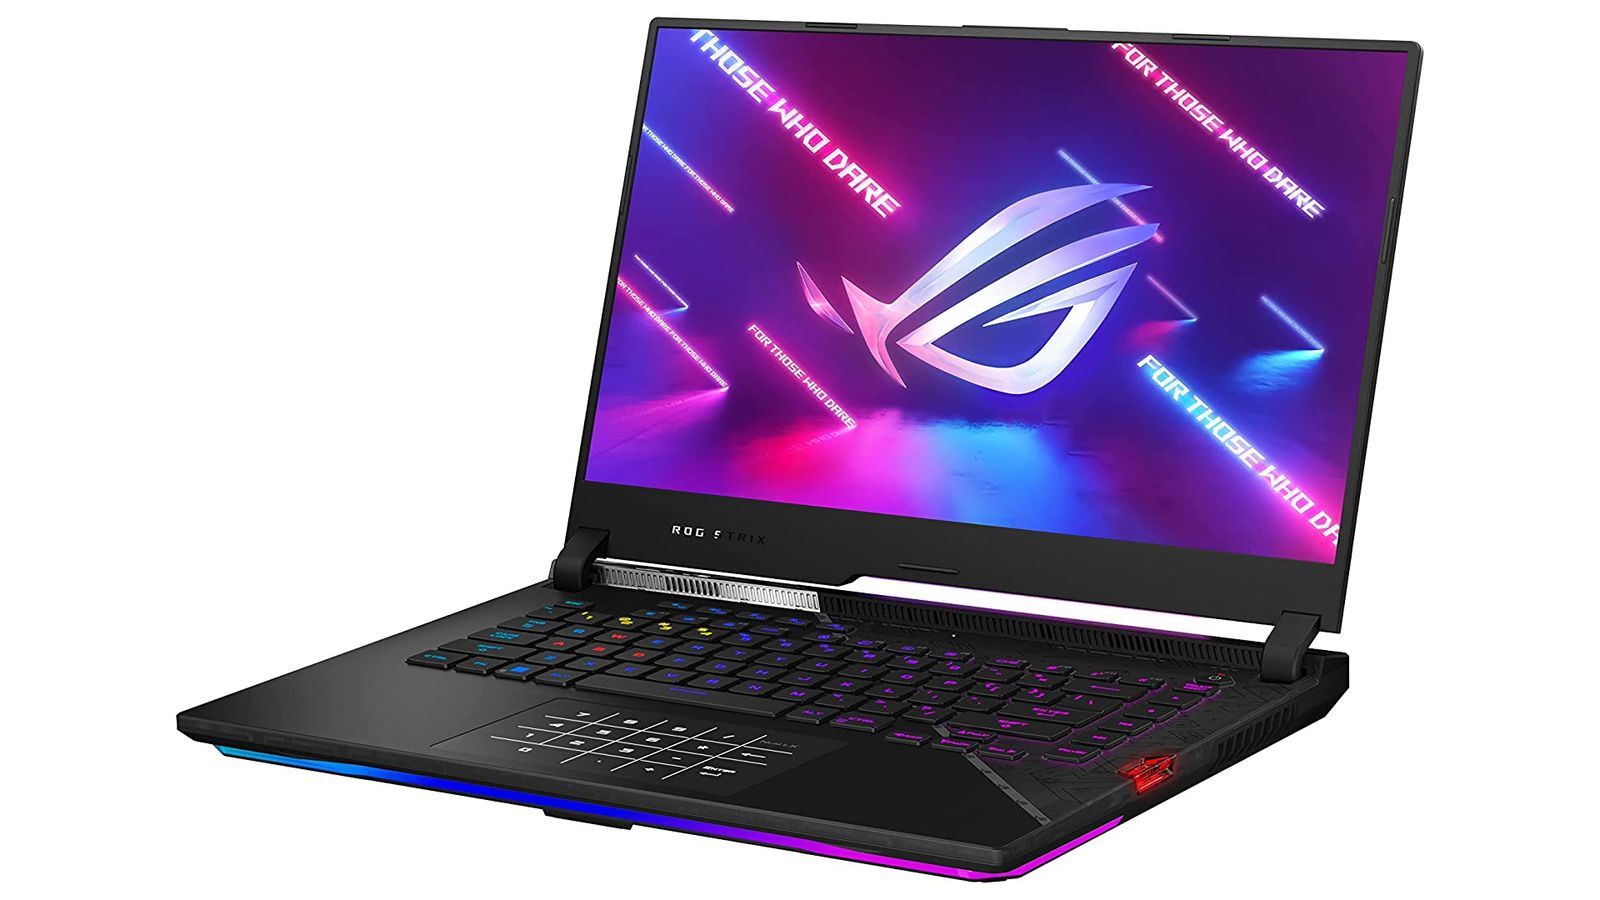 Asus ROG Strix Scar 15 product image of a black laptop featuring multicoloured backlit keys and purple and pink ROG branding on the display.